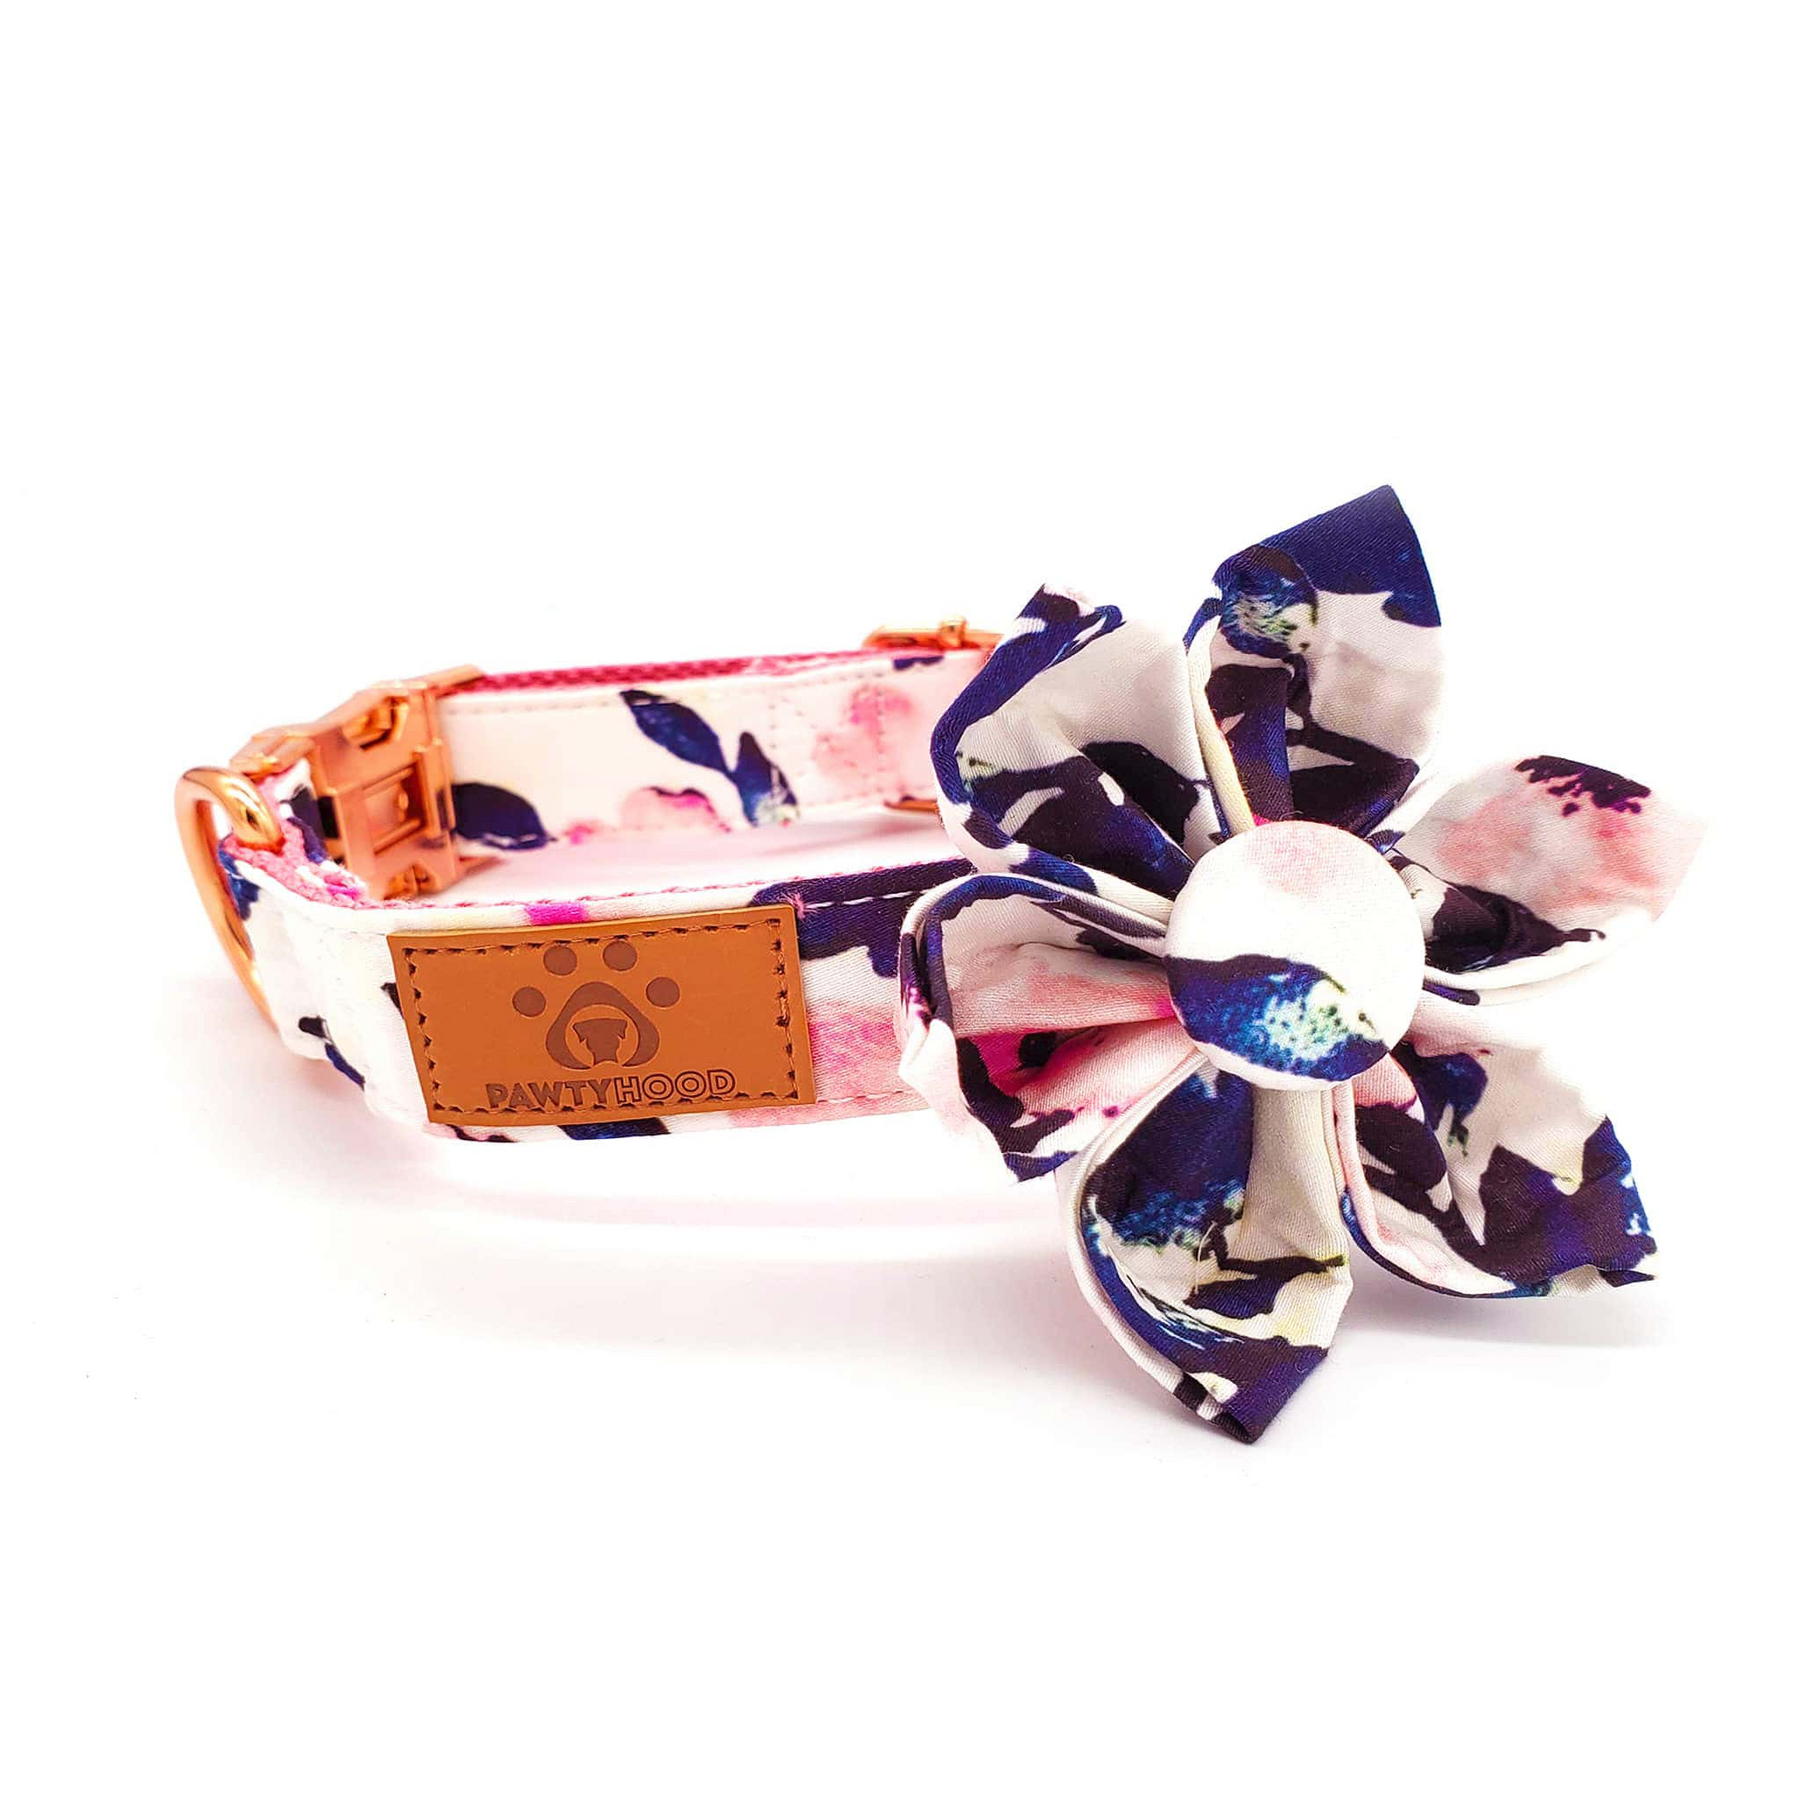 Treats Unleashed  Upcountry UpCountry Cherry Blossoms Dog Collar